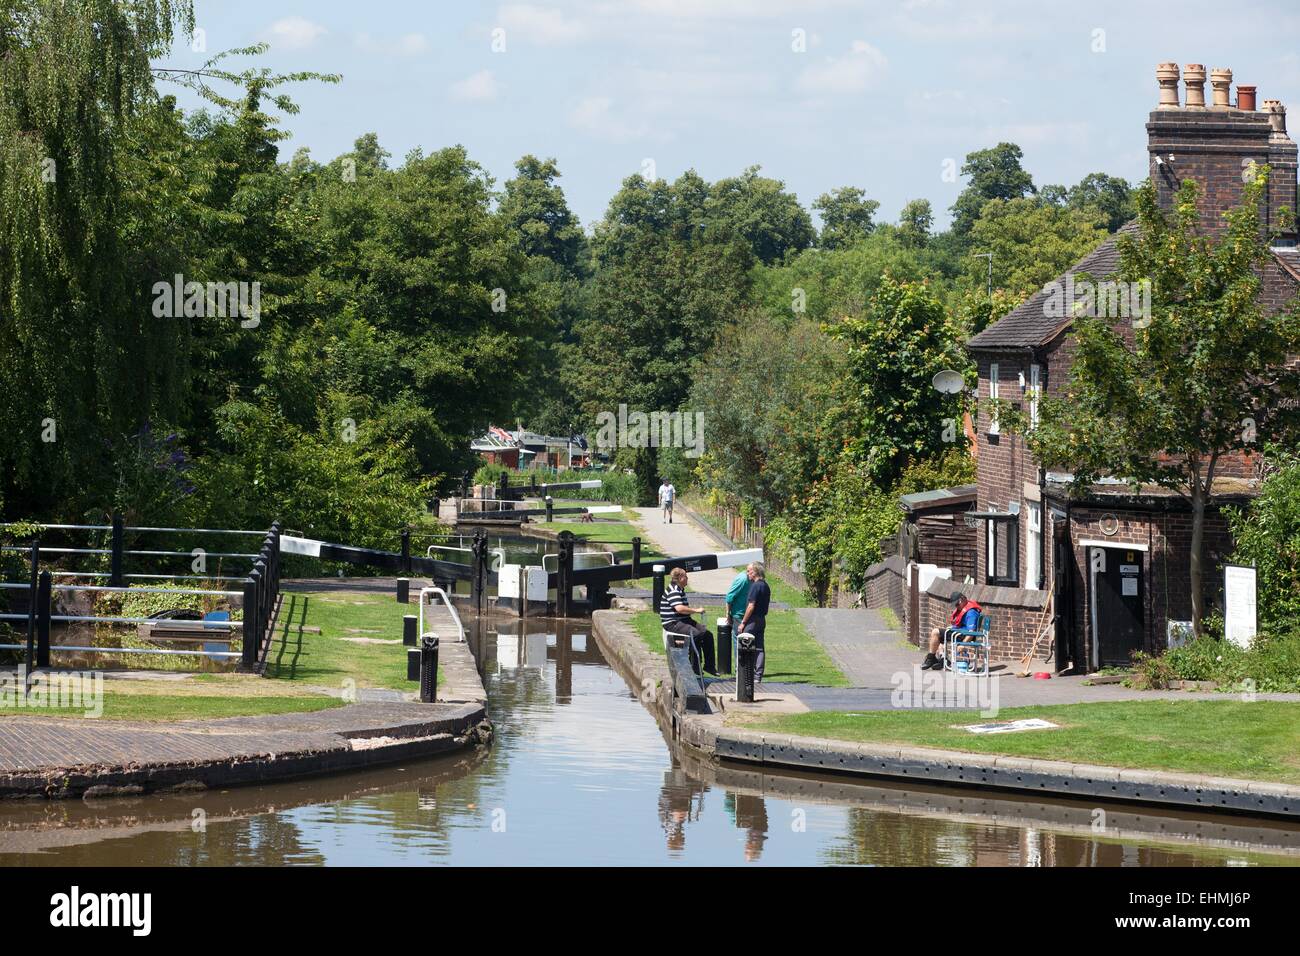 Le Canal De Coventry A Atherstone Warwickshire Uk Ehmj6p 